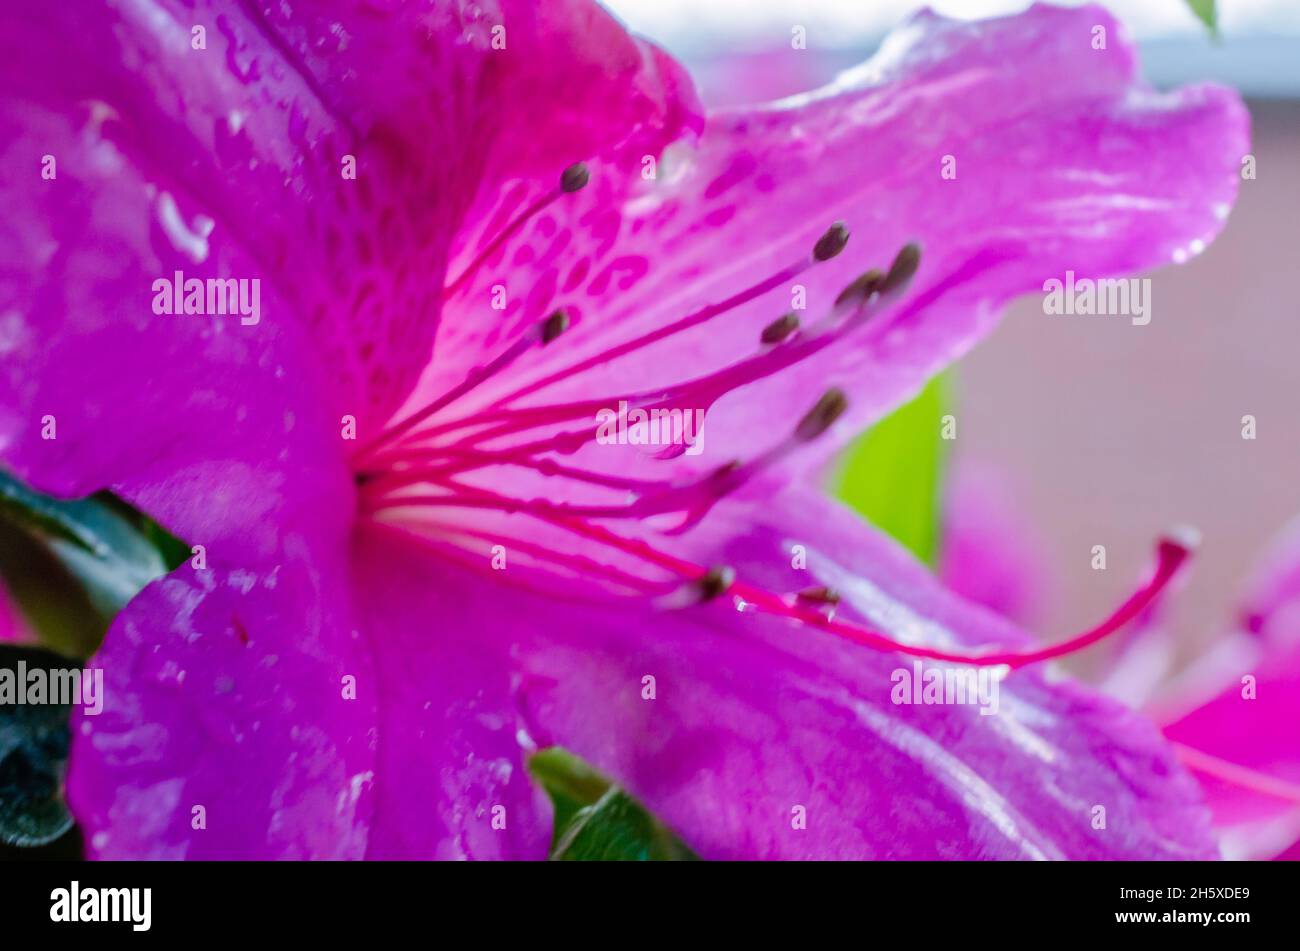 Southern Indian azaleas (Rhododendron indicum) are dotted with water droplets, April 8, 2014, in Mobile, Alabama. Stock Photo